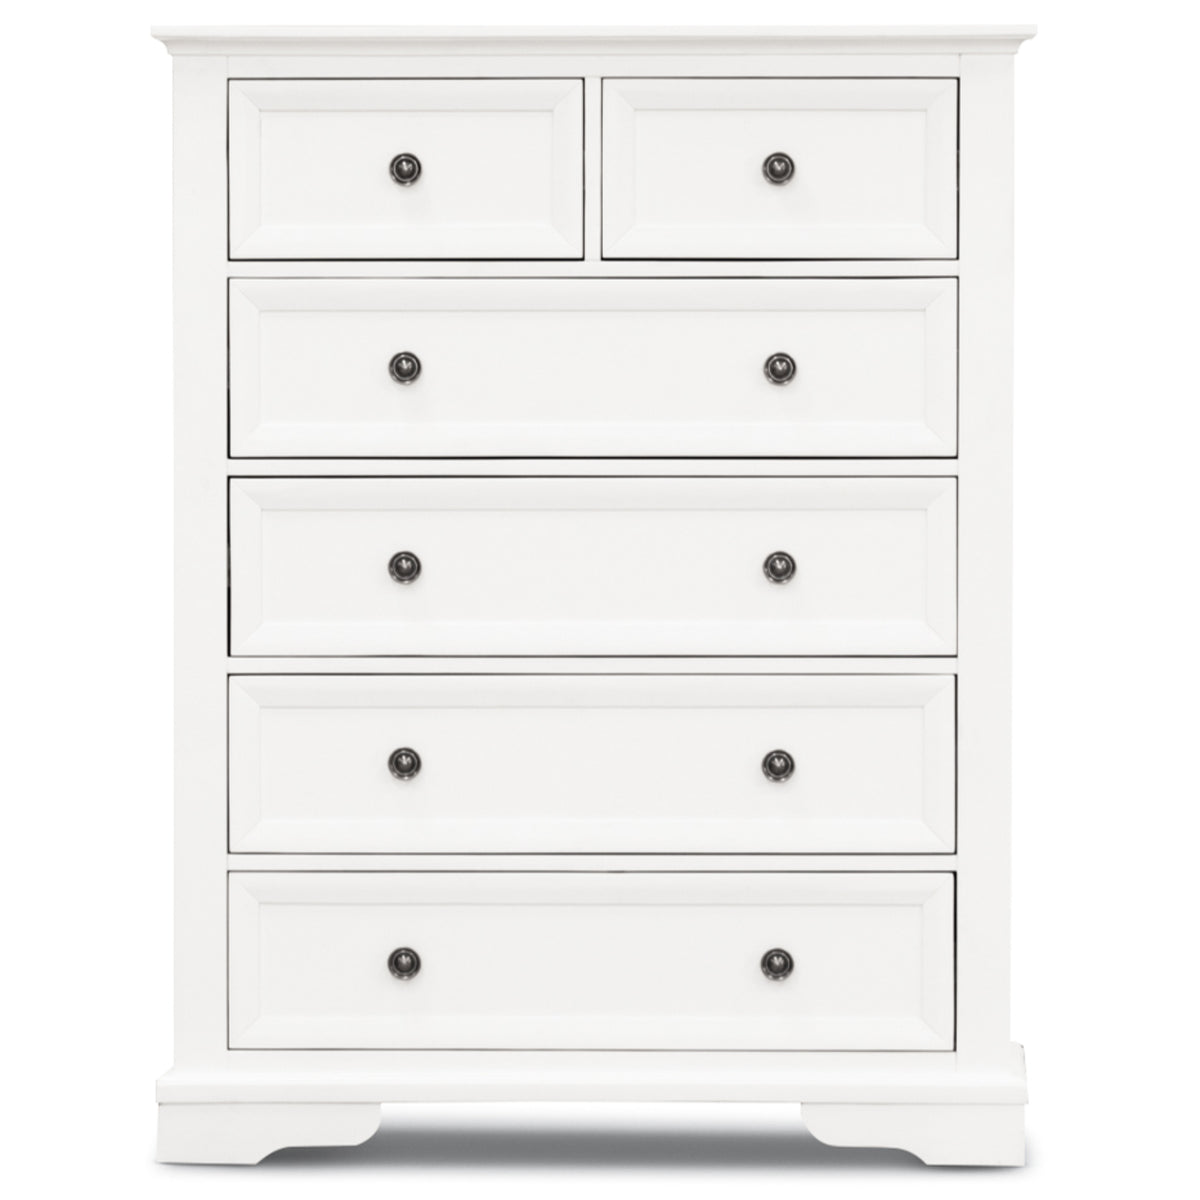 Celosia Tallboy 6 Chest of Drawers Solid Acacia Wood Bed Storage Cabinet - White